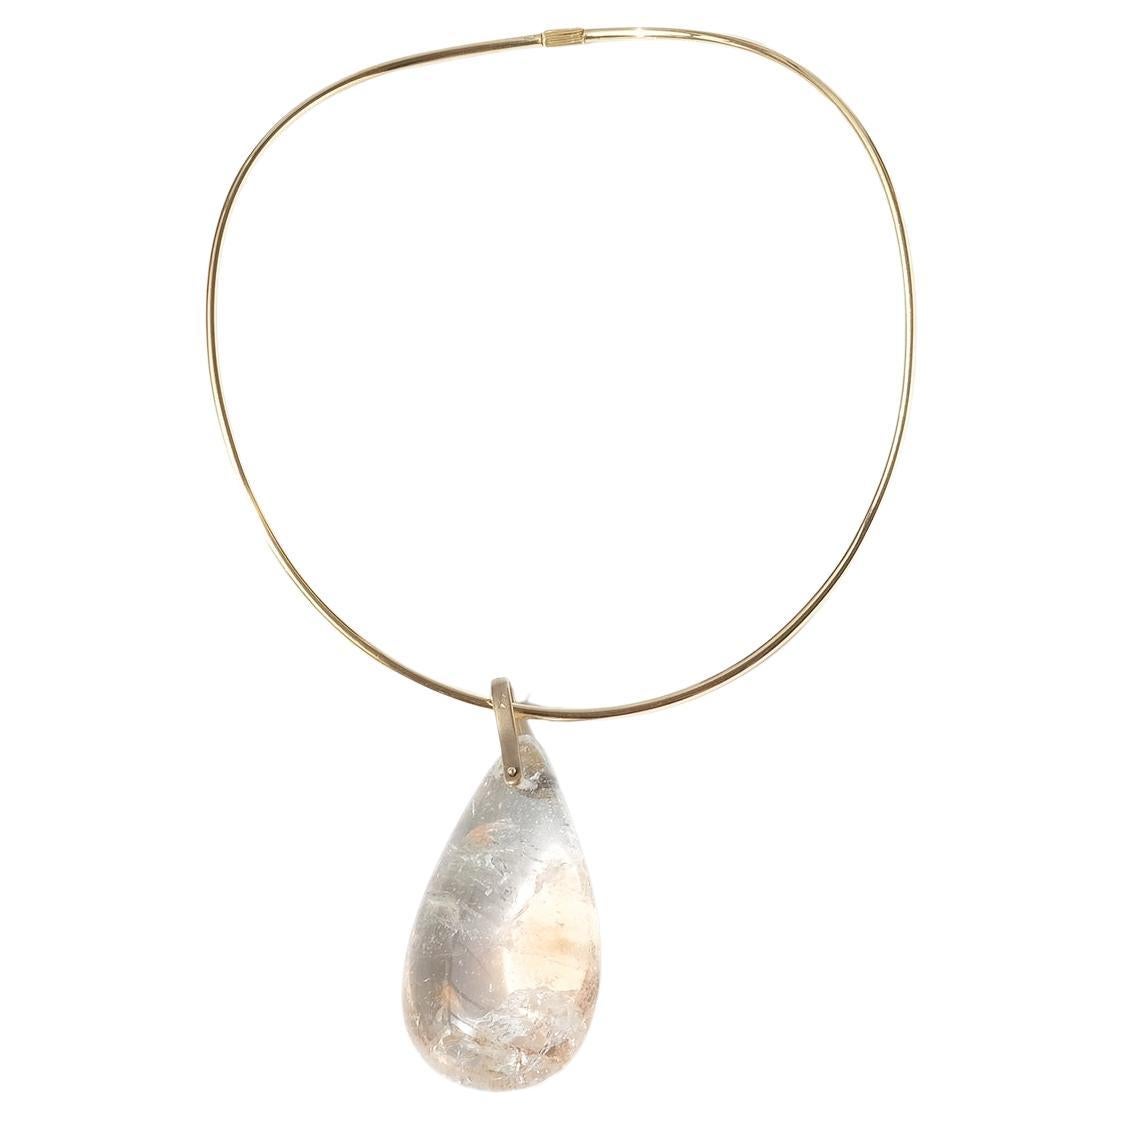 This 18 karat gold neck-ring has a large drop shaped, transparent and peach colored quartz stone with dramatic inclusions. On top of the pendant drop is a large 18 karat bail and the neck-ring closes easily with a screw lock. The neck-ring can of